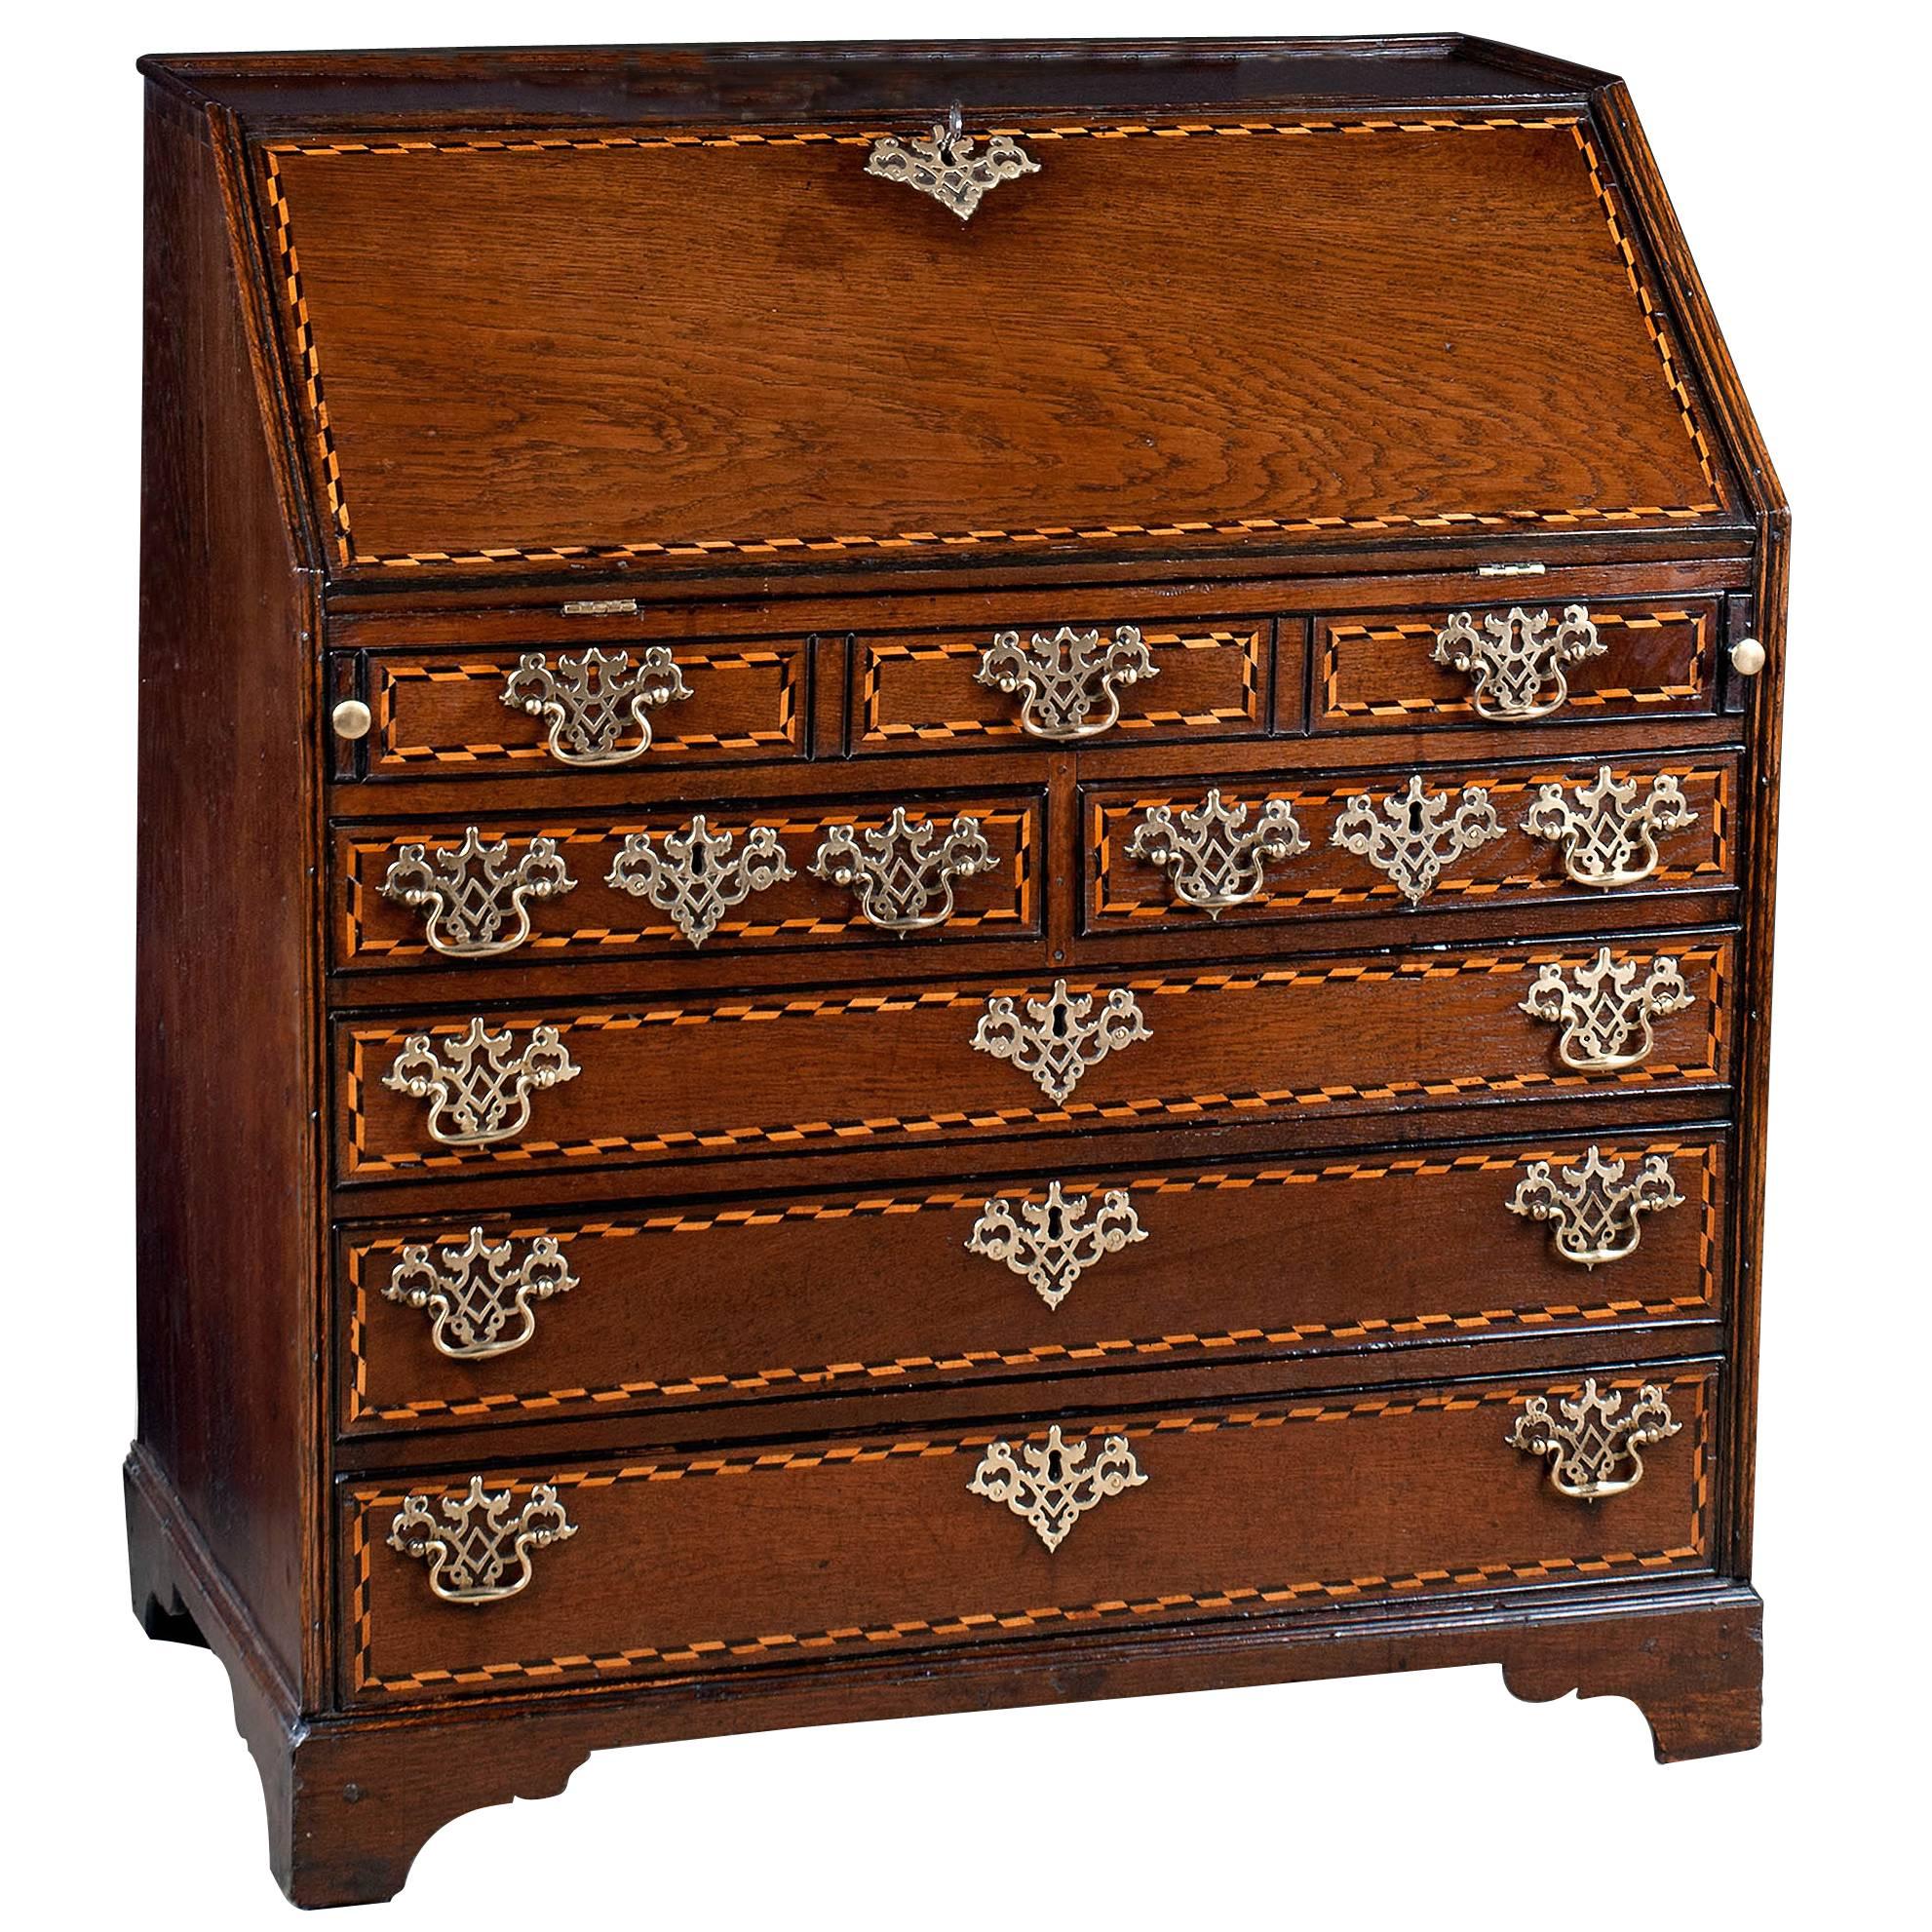 Early 18th Century Oak Bureau with Holly and Bog Oak Chequer Bandings